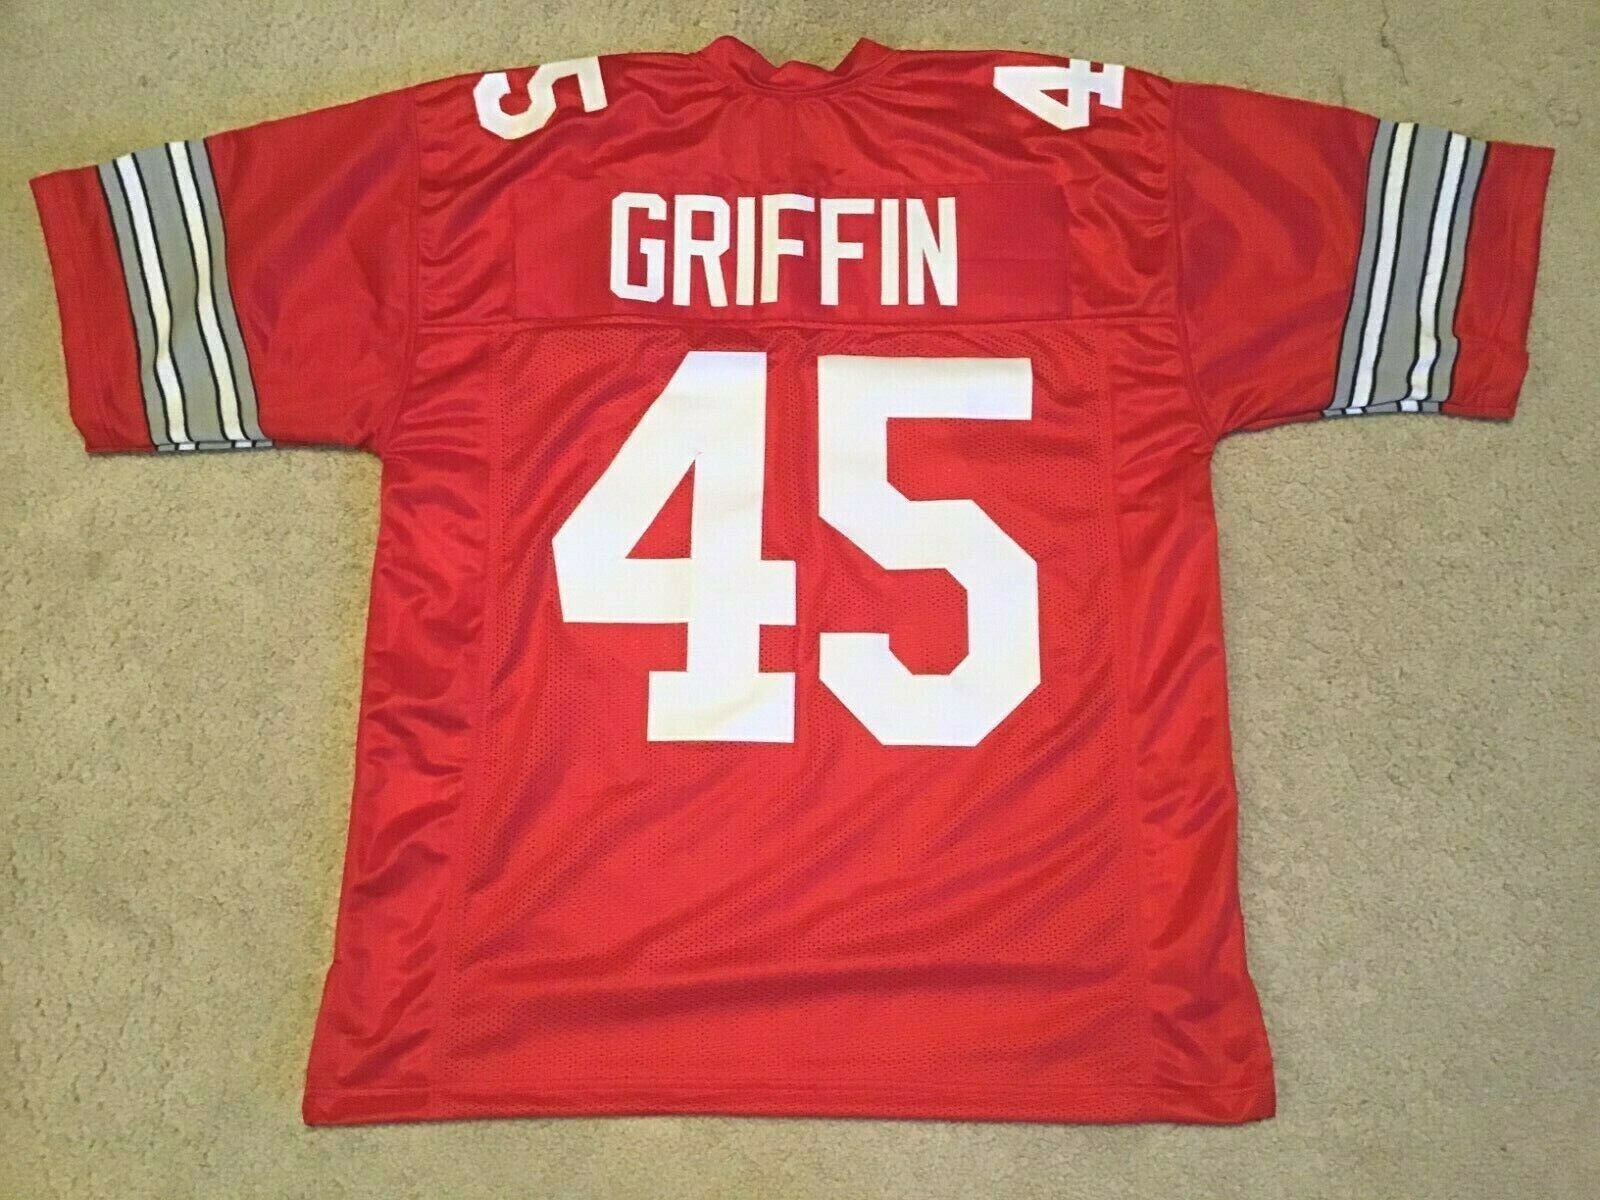 UNSIGNED CUSTOM Sewn Stitched Archie Griffin Red Jersey - M, L, XL, 2XL